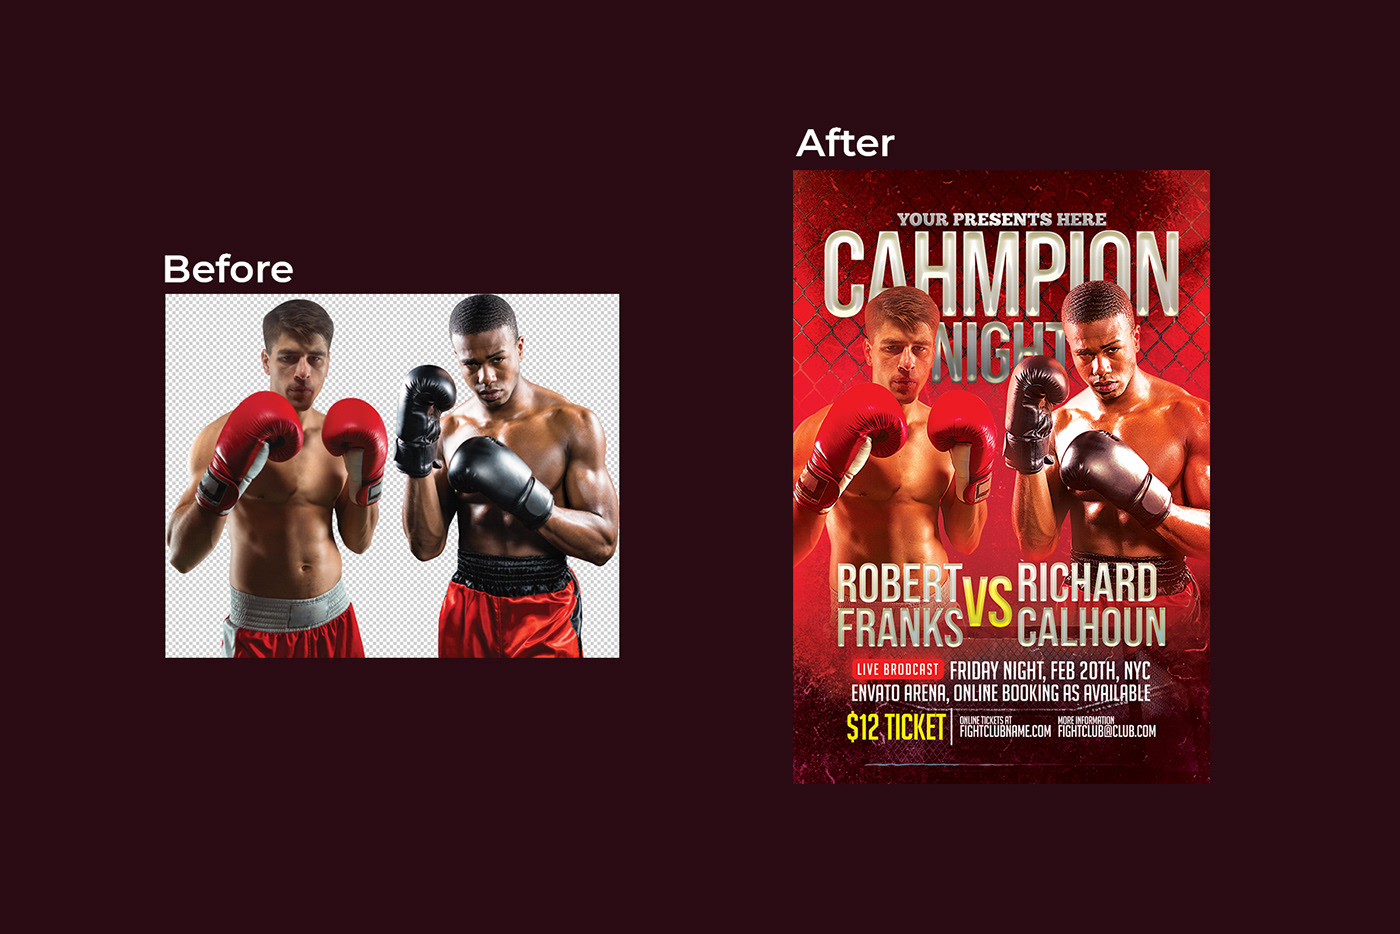 Boxing champion mma champions ufc fighting match flyer MMA mma flyer poster UFC ufc flyer